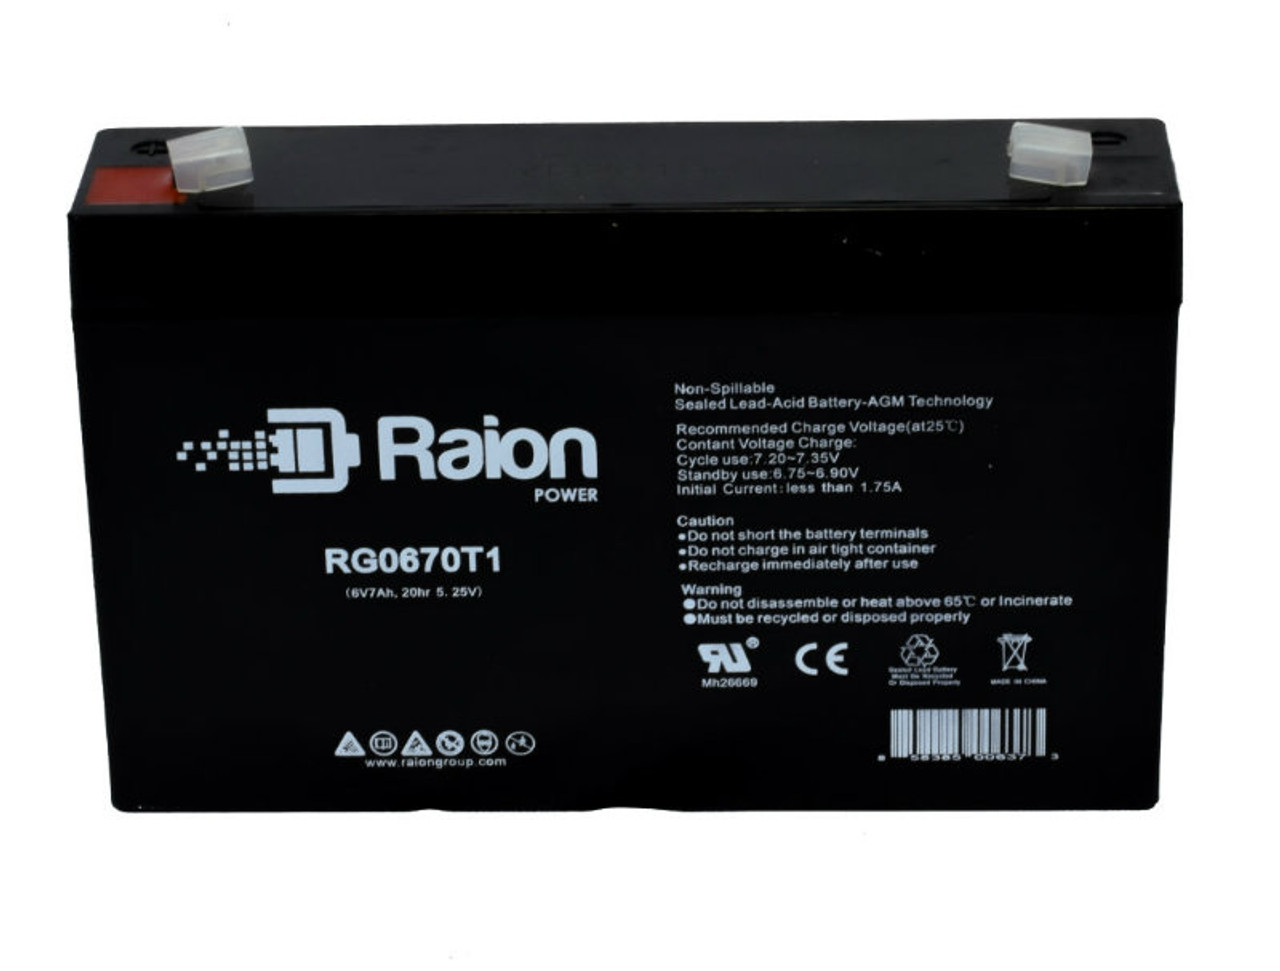 Raion Power RG0670T1 Replacement Battery Cartridge for Pace Tech MiniPack 911ST Monitor